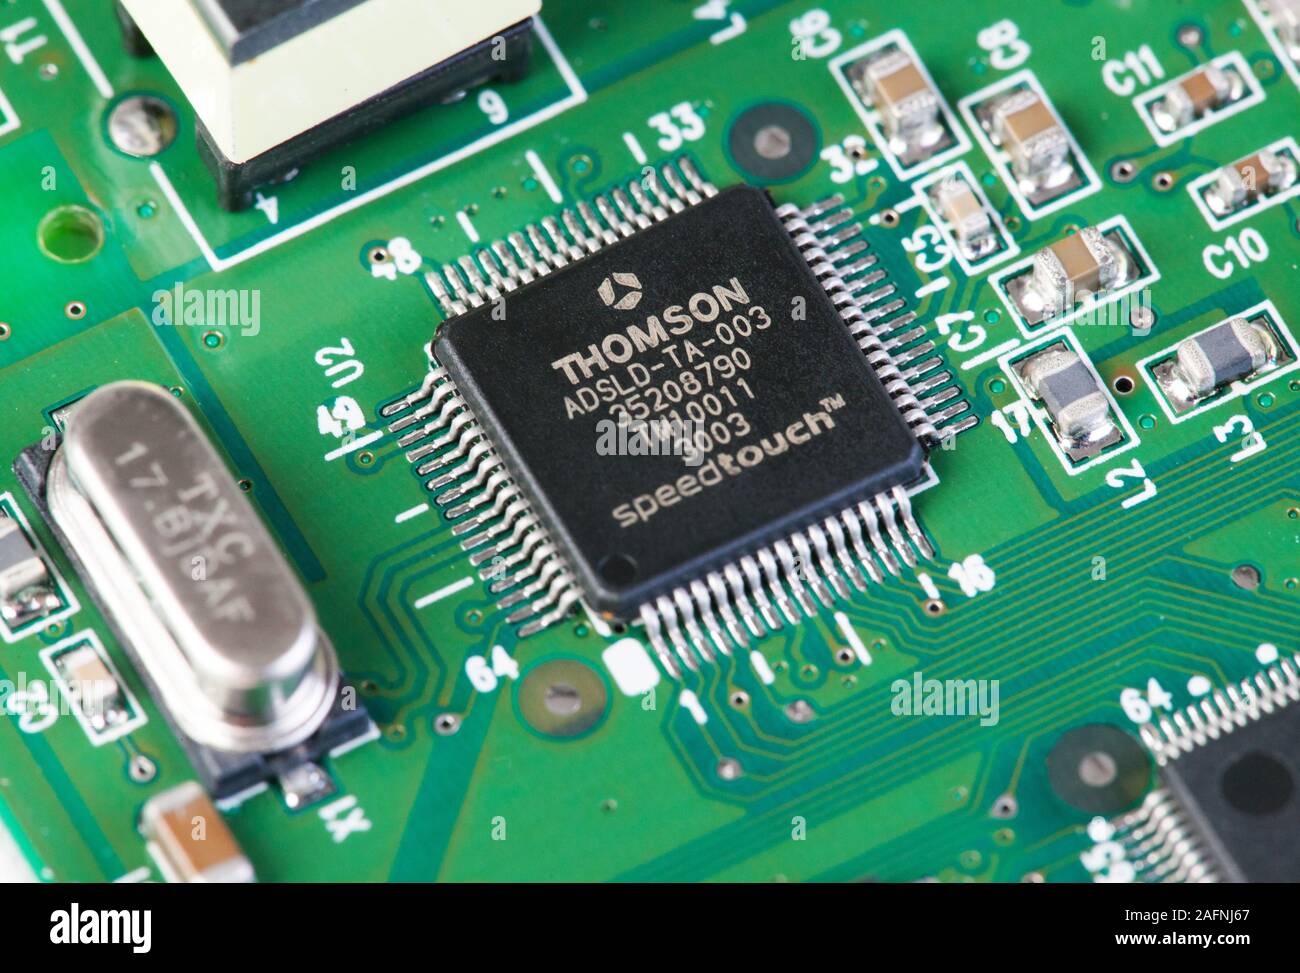 Thomson (STMicroelectronics) 64 pin QFN integrated circuit chip on surface mount circuit board Stock Photo